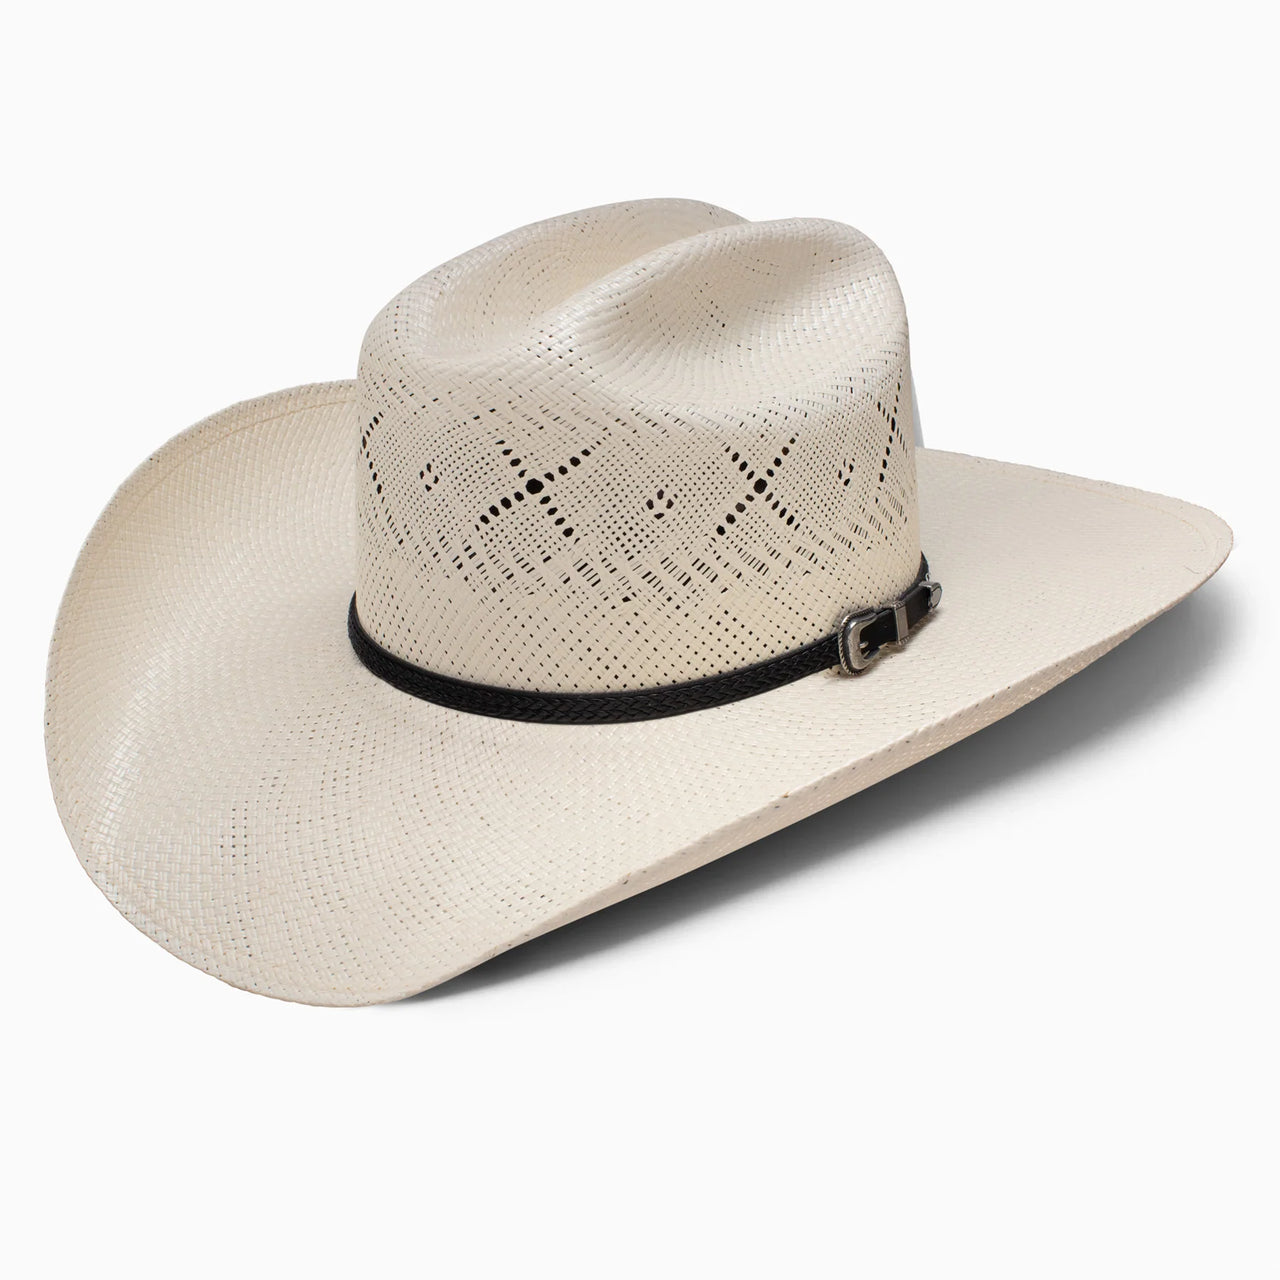 Resistol 20X All My Ex's Straw Western Hat - Natural